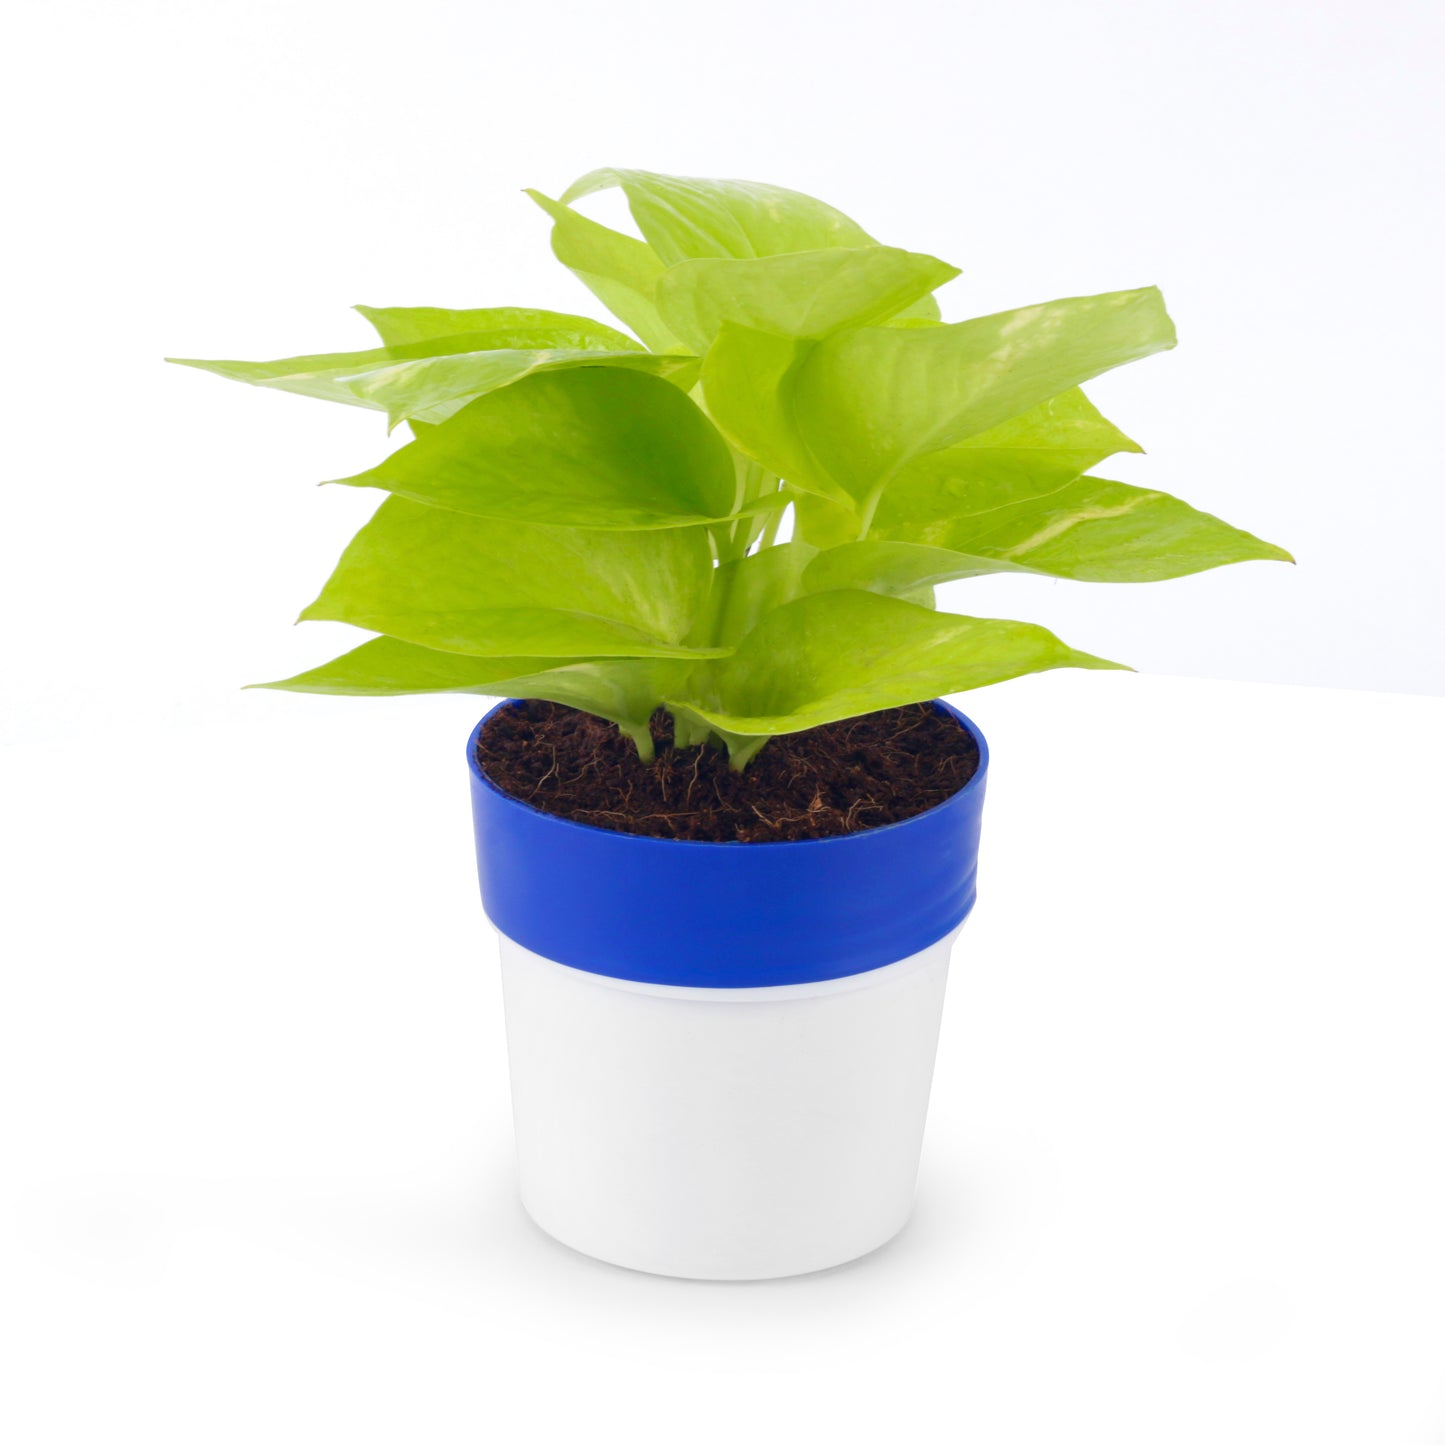 Golden Money Plant With Jade Plant with Blue/White Plastic Pot